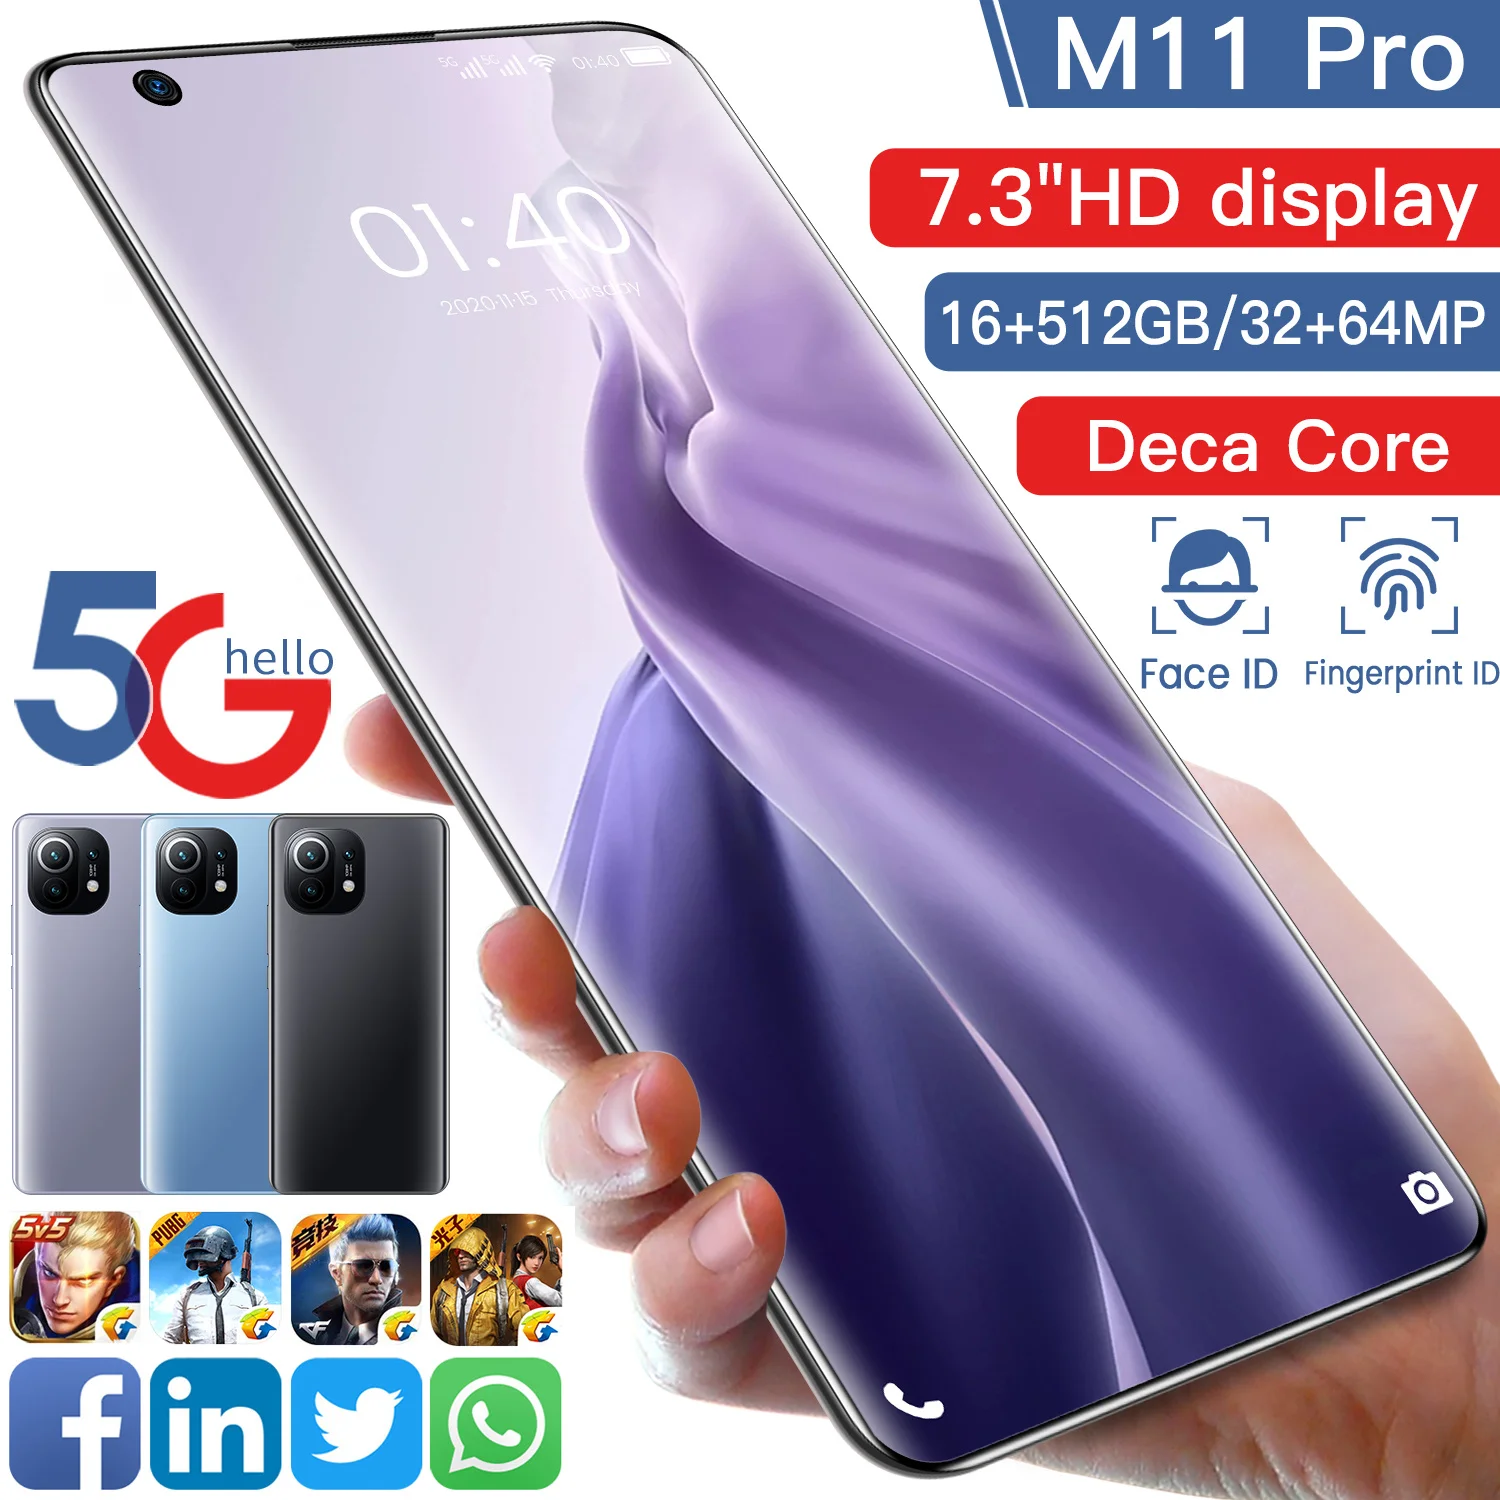 

Hot Selling M11 Pro 7.3 Inch 16GB+512GB Supports Smart Wake-up Face Recognition Screen Fingerprint Dual SIM Card 5G Smartphone, Black /blue /purple